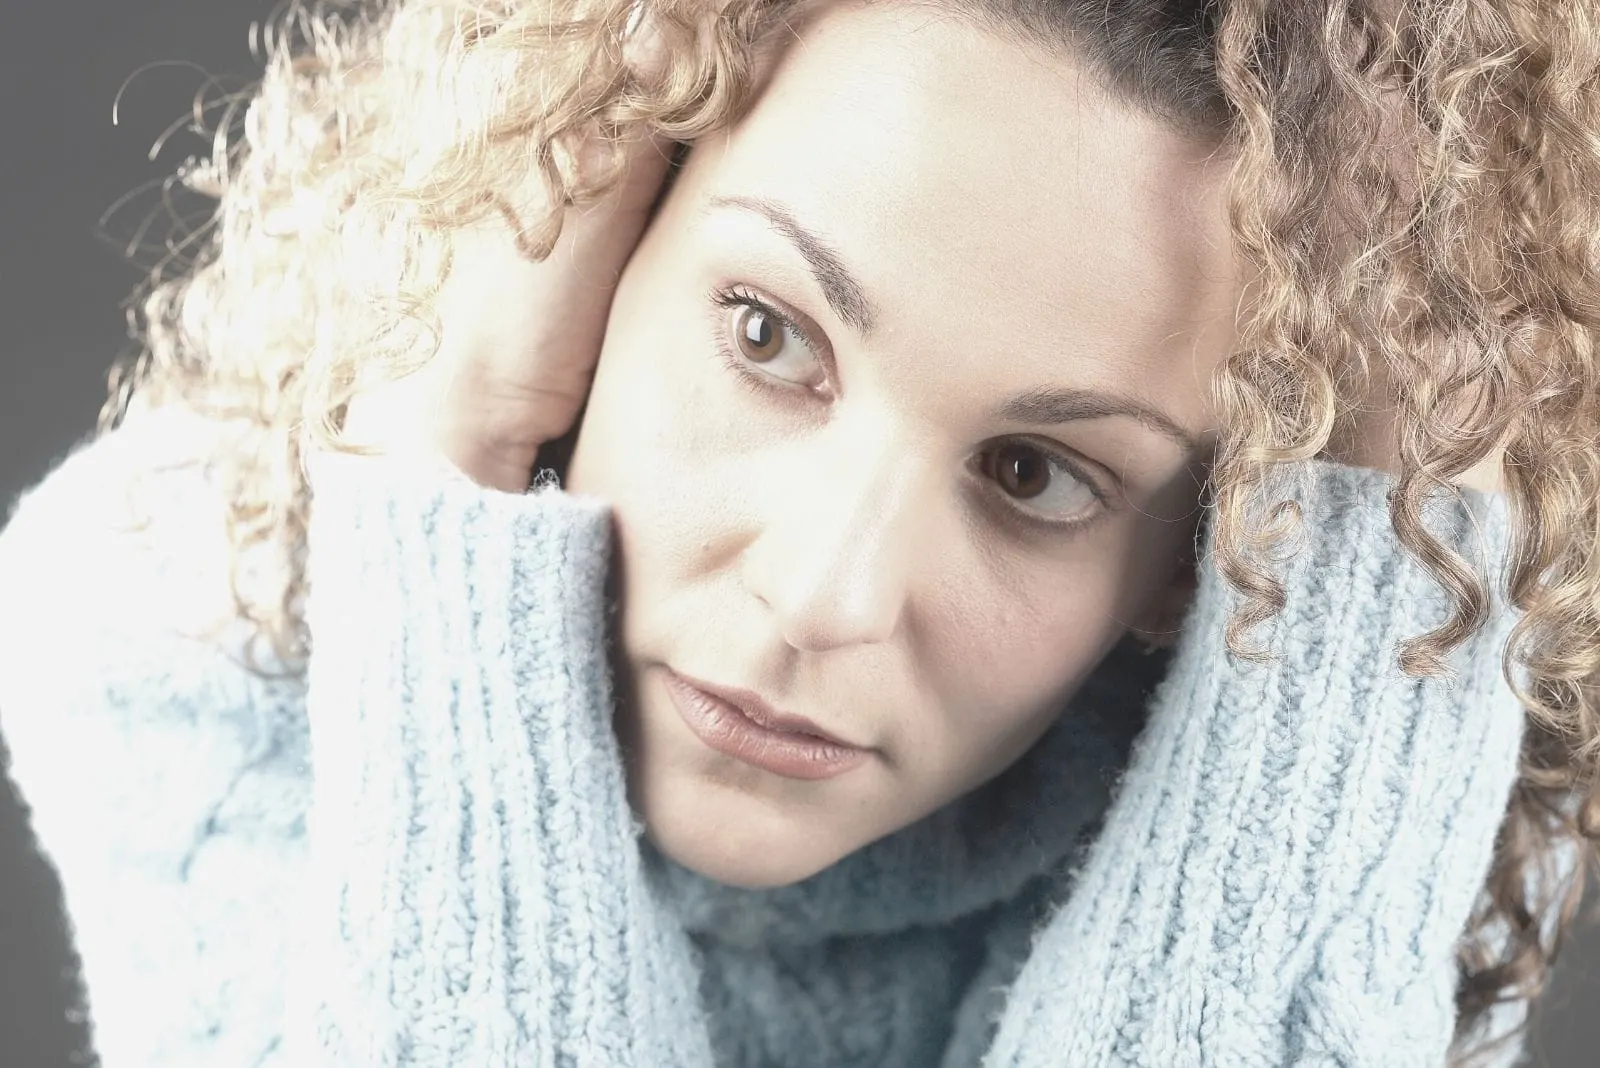 mid adult woman thinking deeply holding her blonde curly hair looking away in close up image